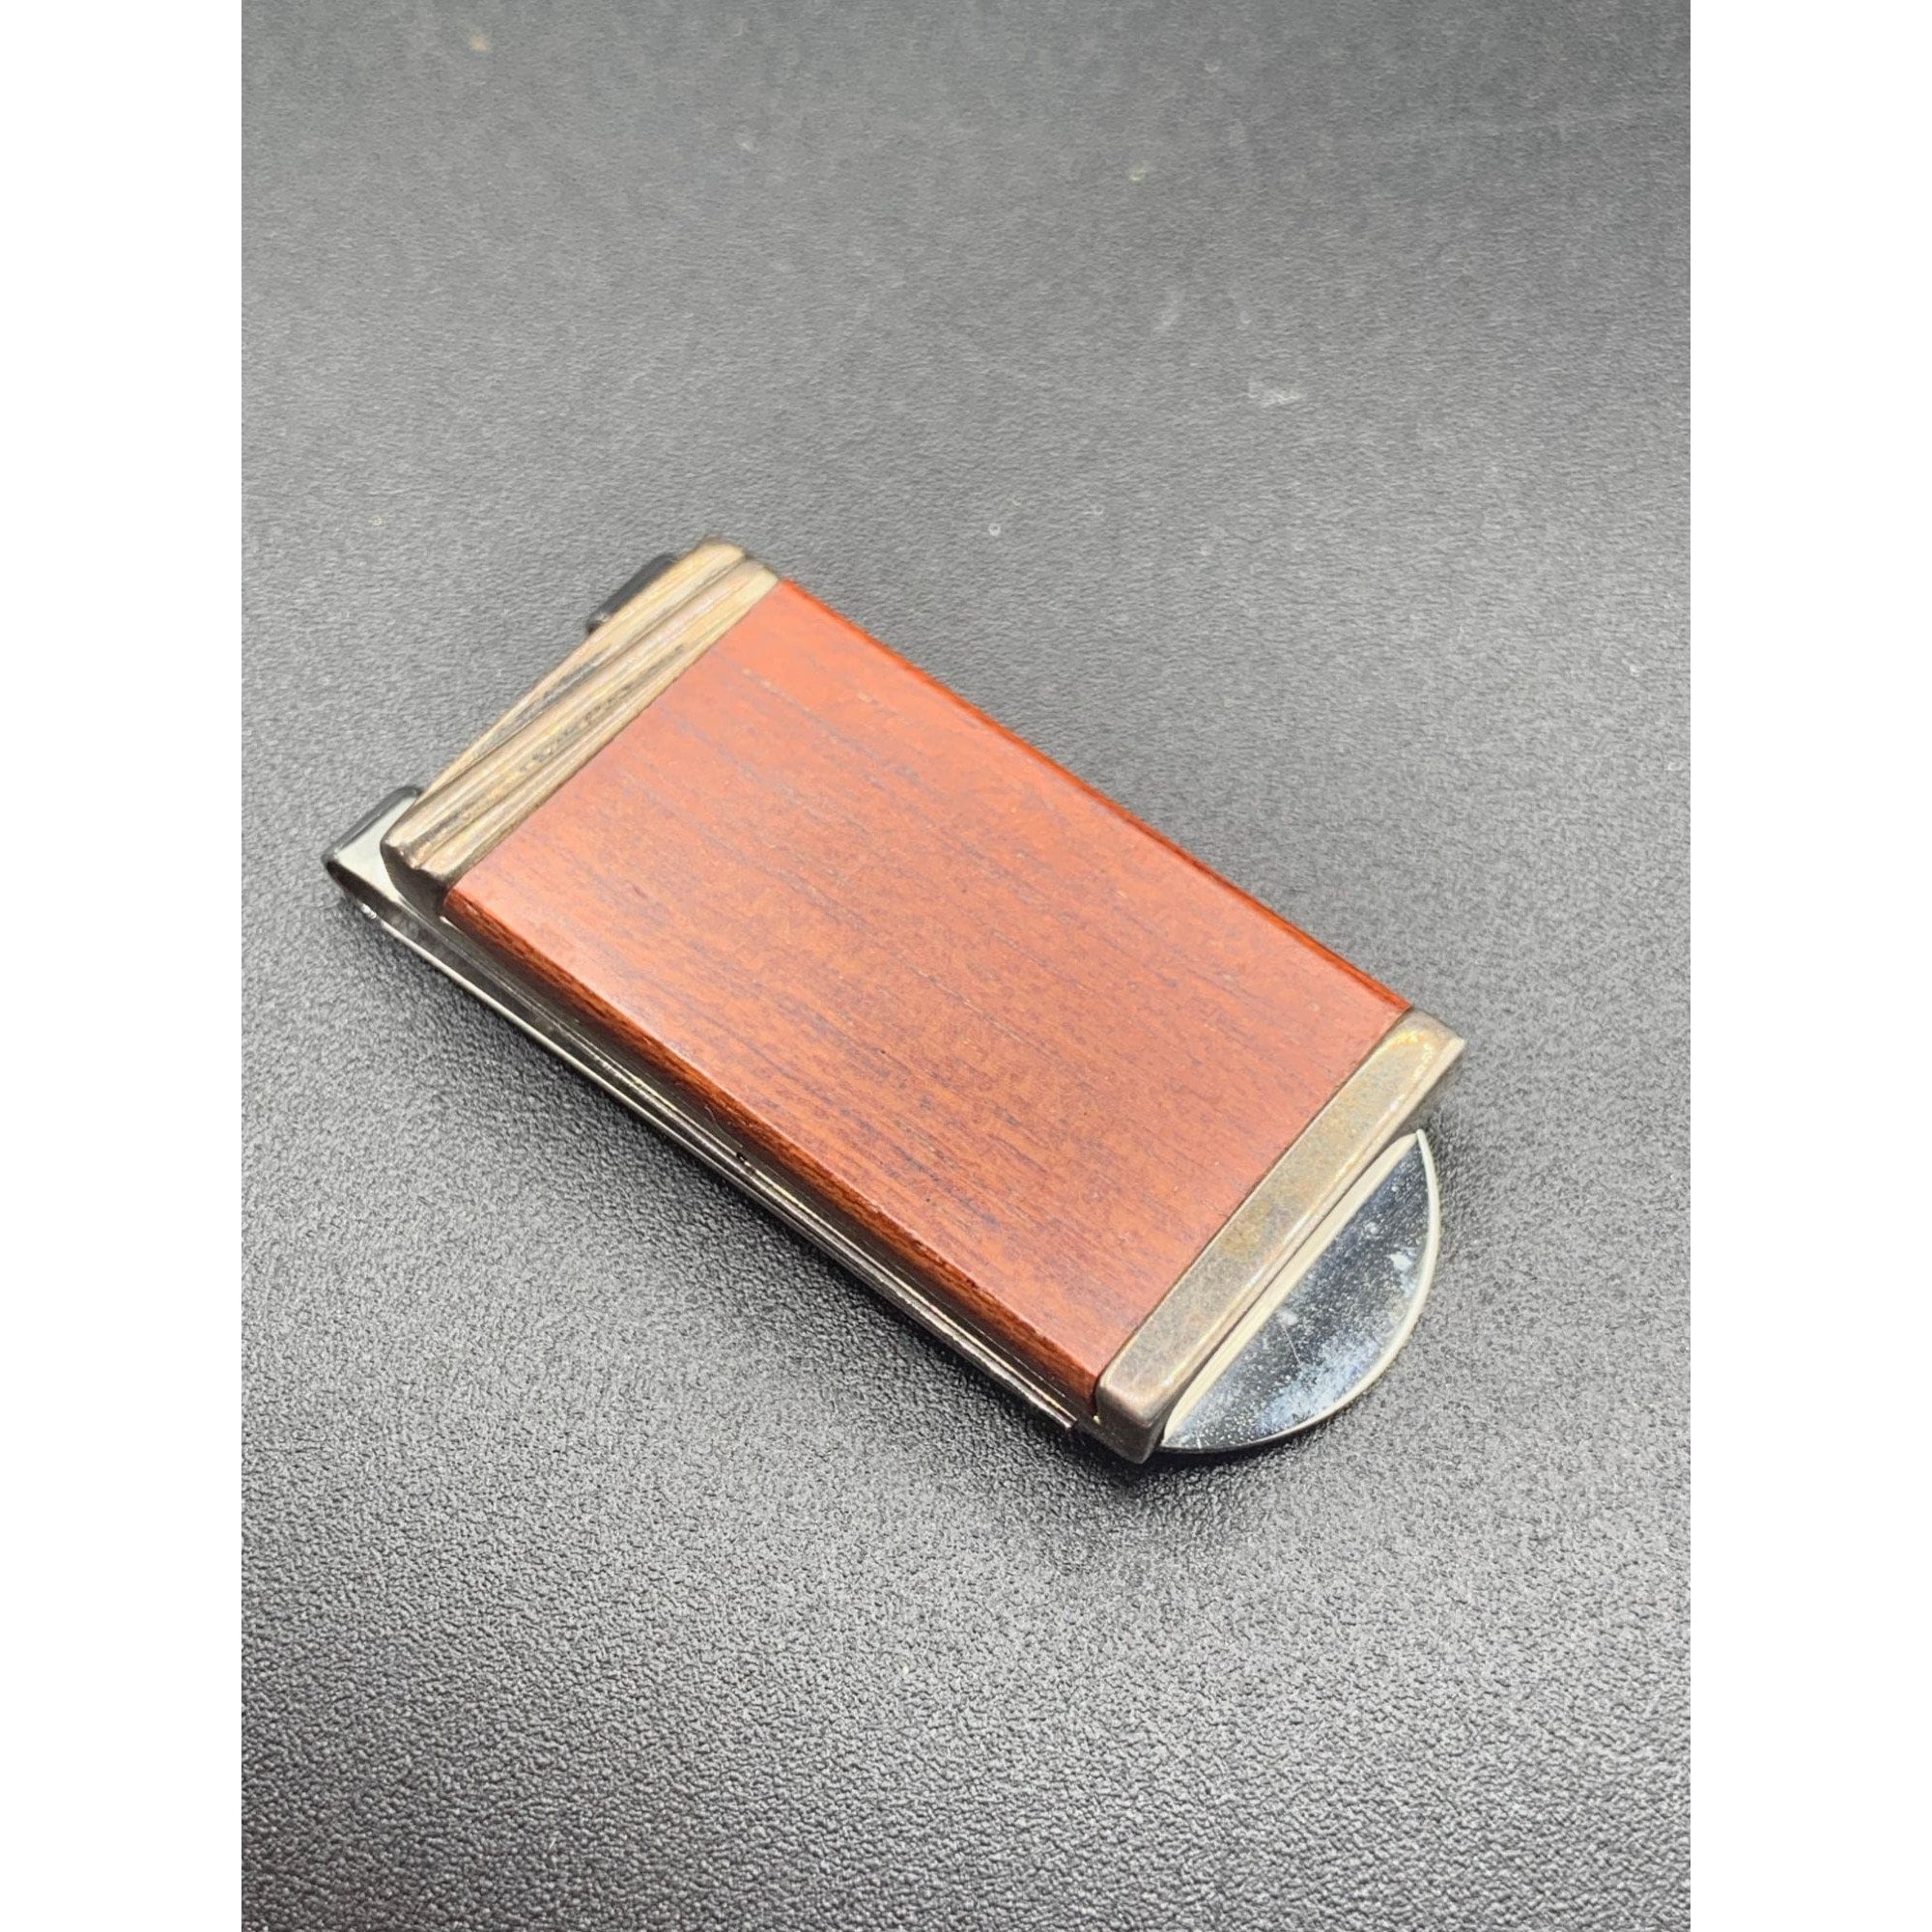 Cartier Money Clip Wood Sterling Silver 925 Authentic Luxury Wallet Money Holder